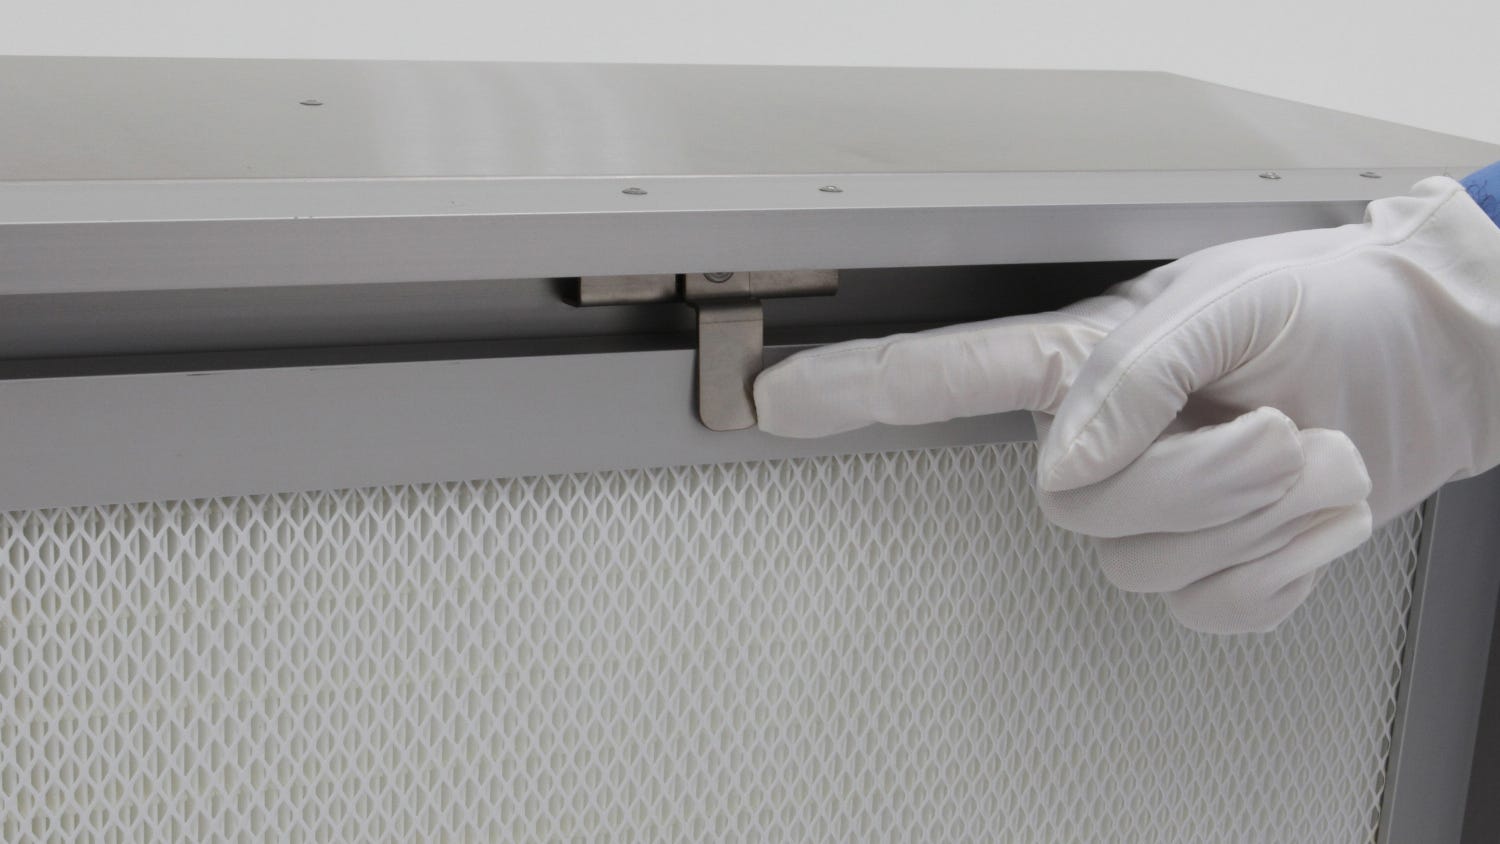 Terra Cleanroom Filter Replacements for Cleanrooms and Controlled Environments